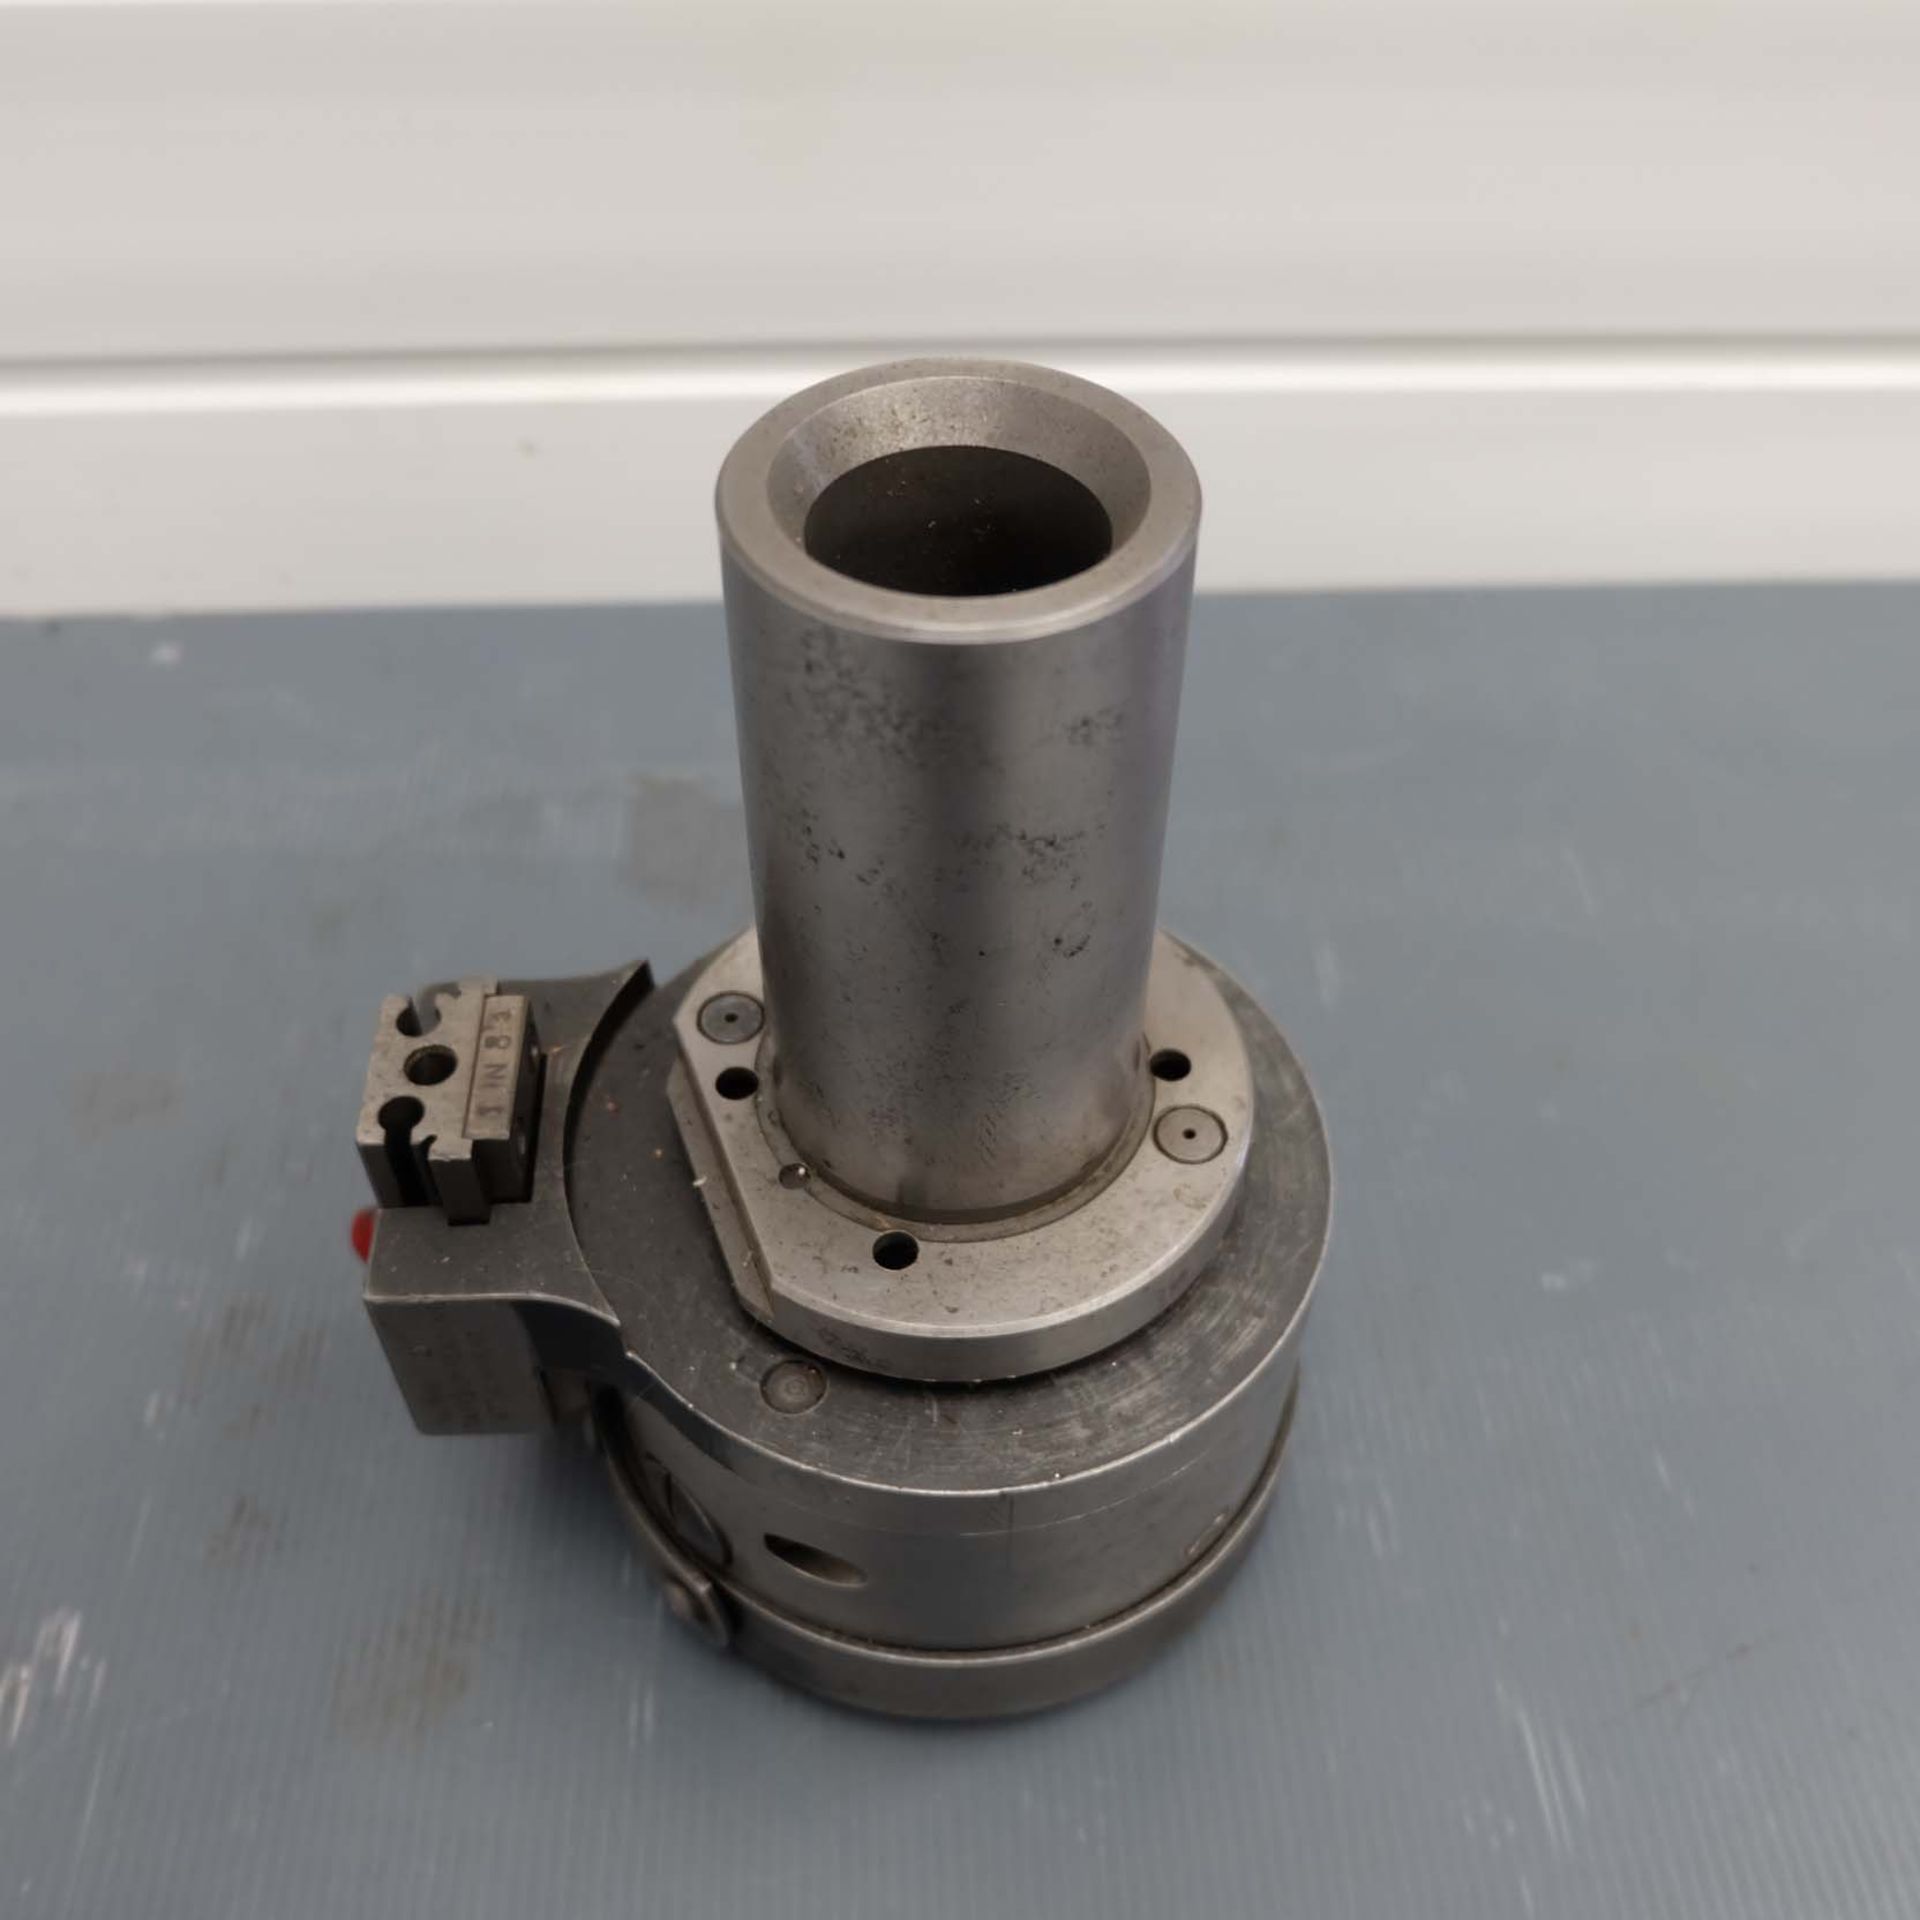 Hampson 1 1/4" CHS Coventry Die Head. With Taper Threading Attachment. Spigot Size 2 1/8" Diameter. - Image 6 of 6